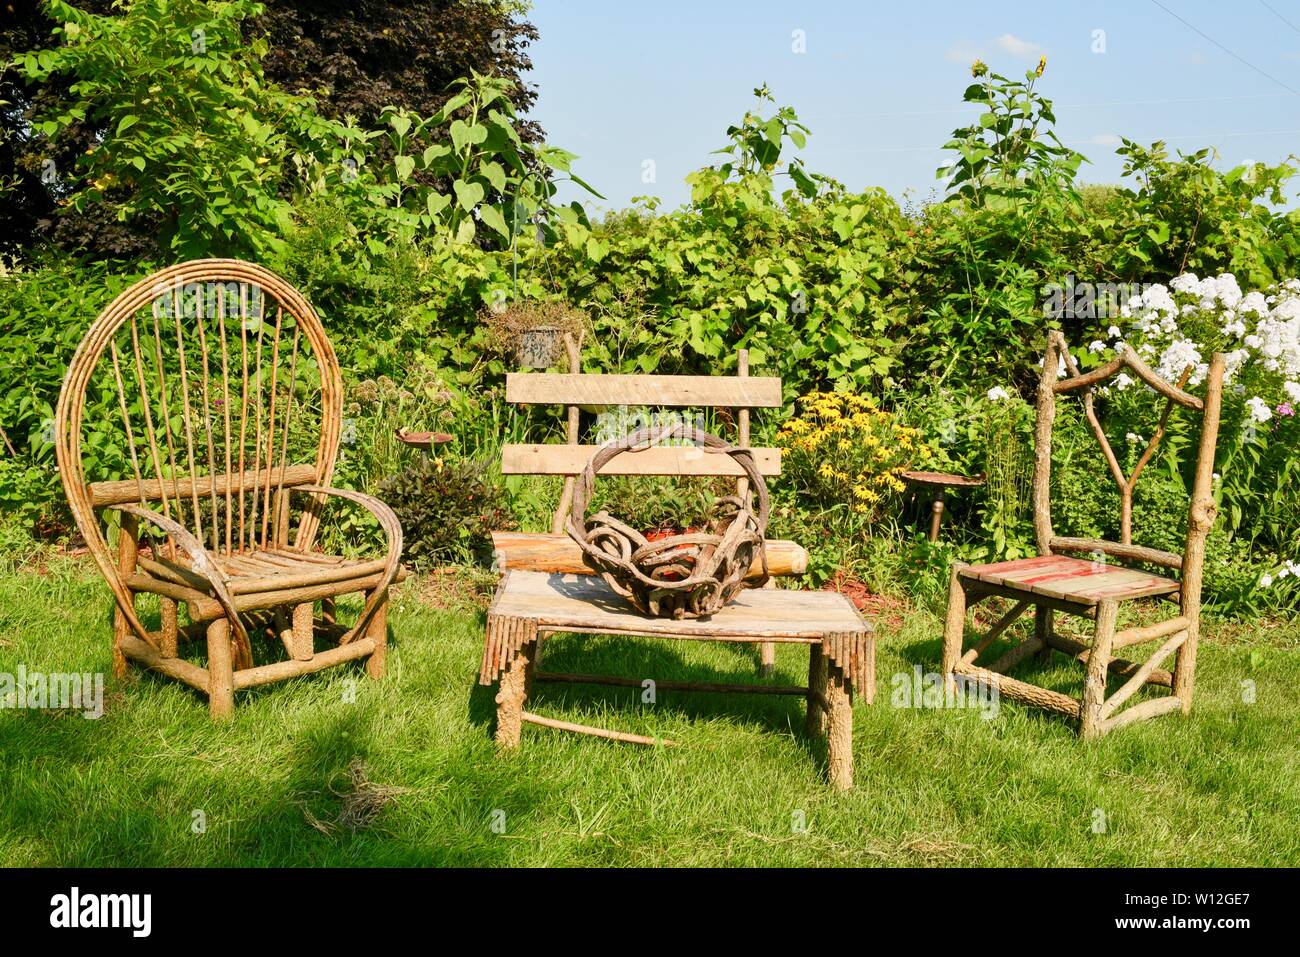 Rustic, wooden hand crafted outdoor furniture chairs and table set in lush  gardens outdoor seating at Squash Blossom Farm, Oronoco, Minnesota, USA  Stock Photo - Alamy